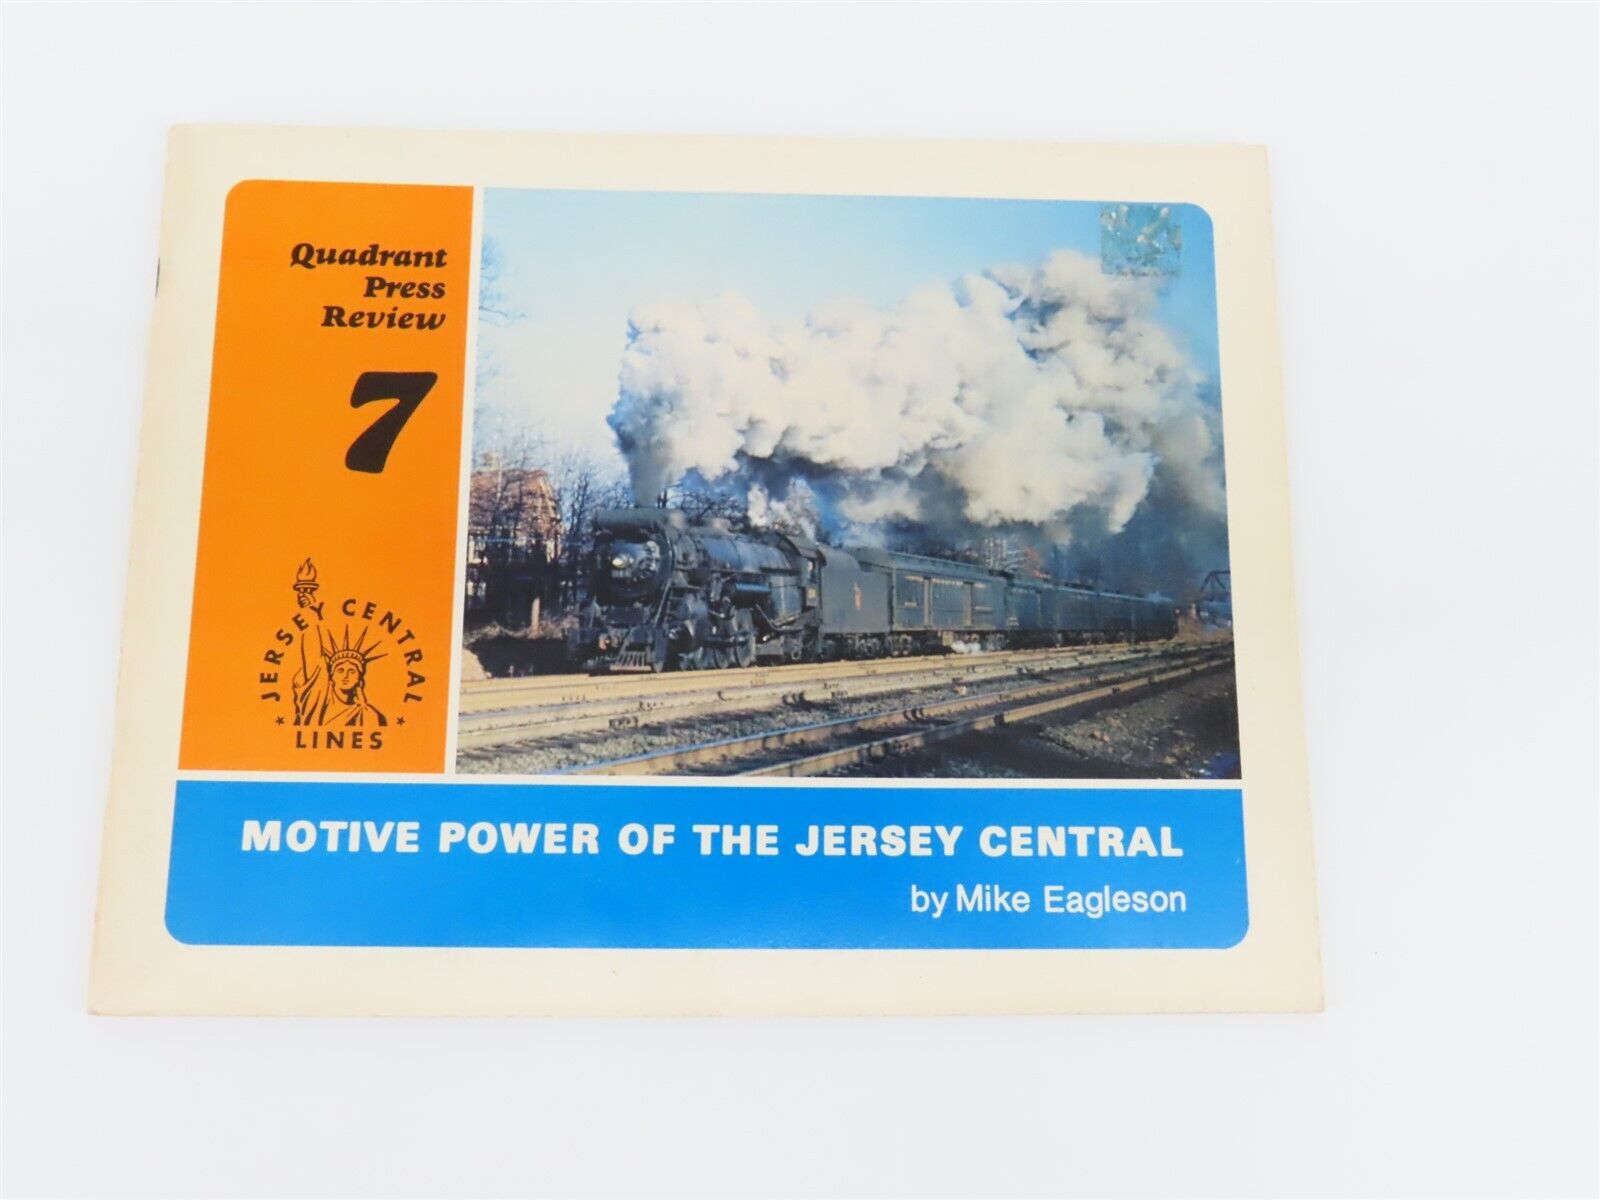 Quadrant Press Review 7: Motive Power of the Jersey Central by Eagleson ©1978 SC